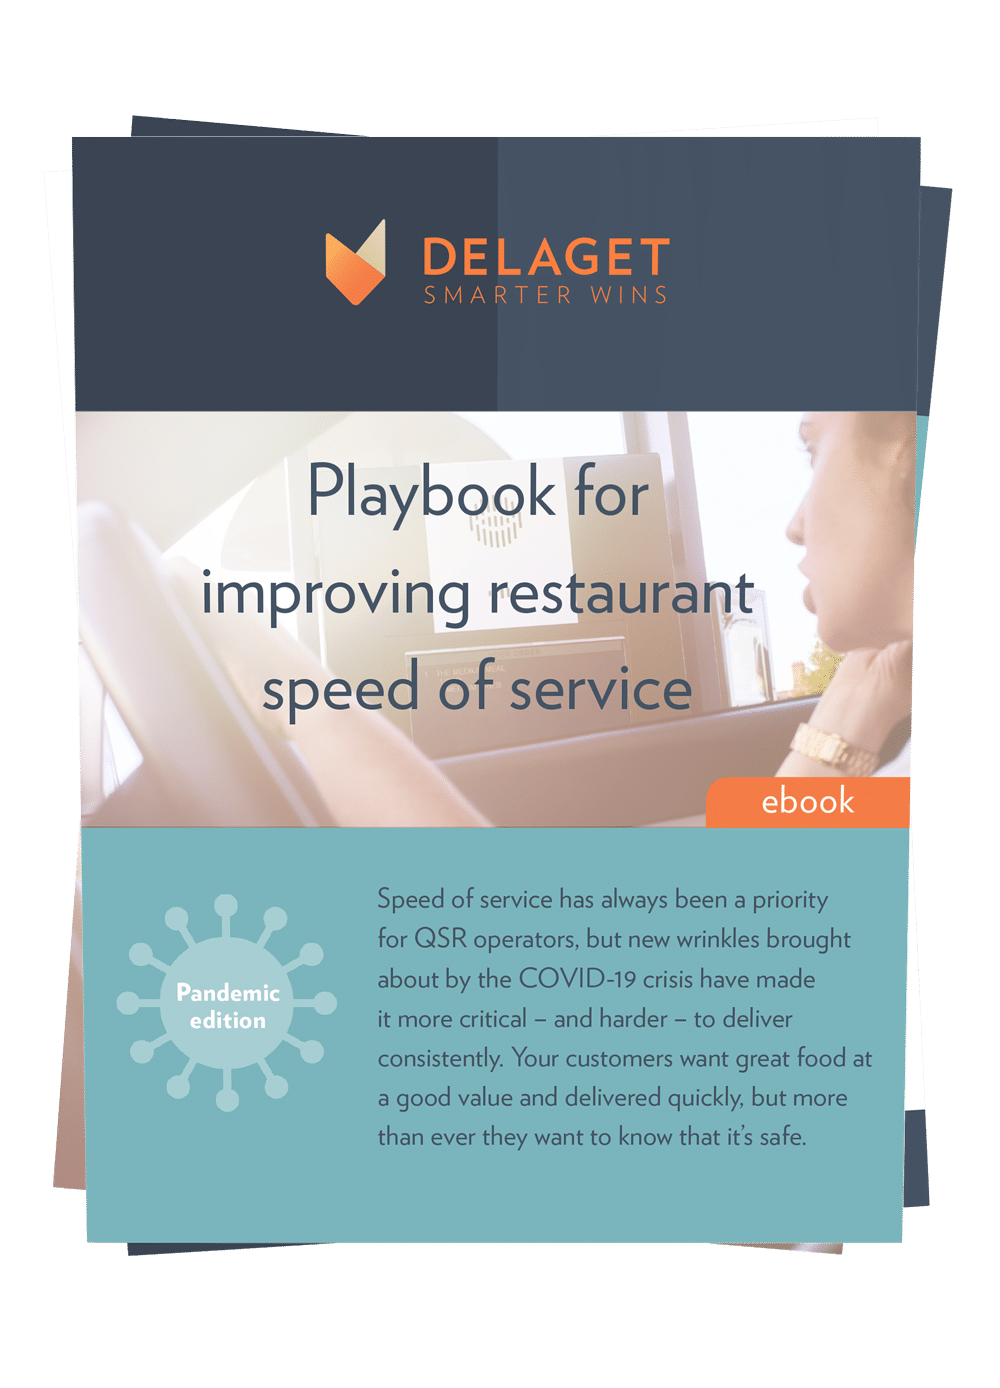 Download the "Playbook for improving restaurant speed of service"